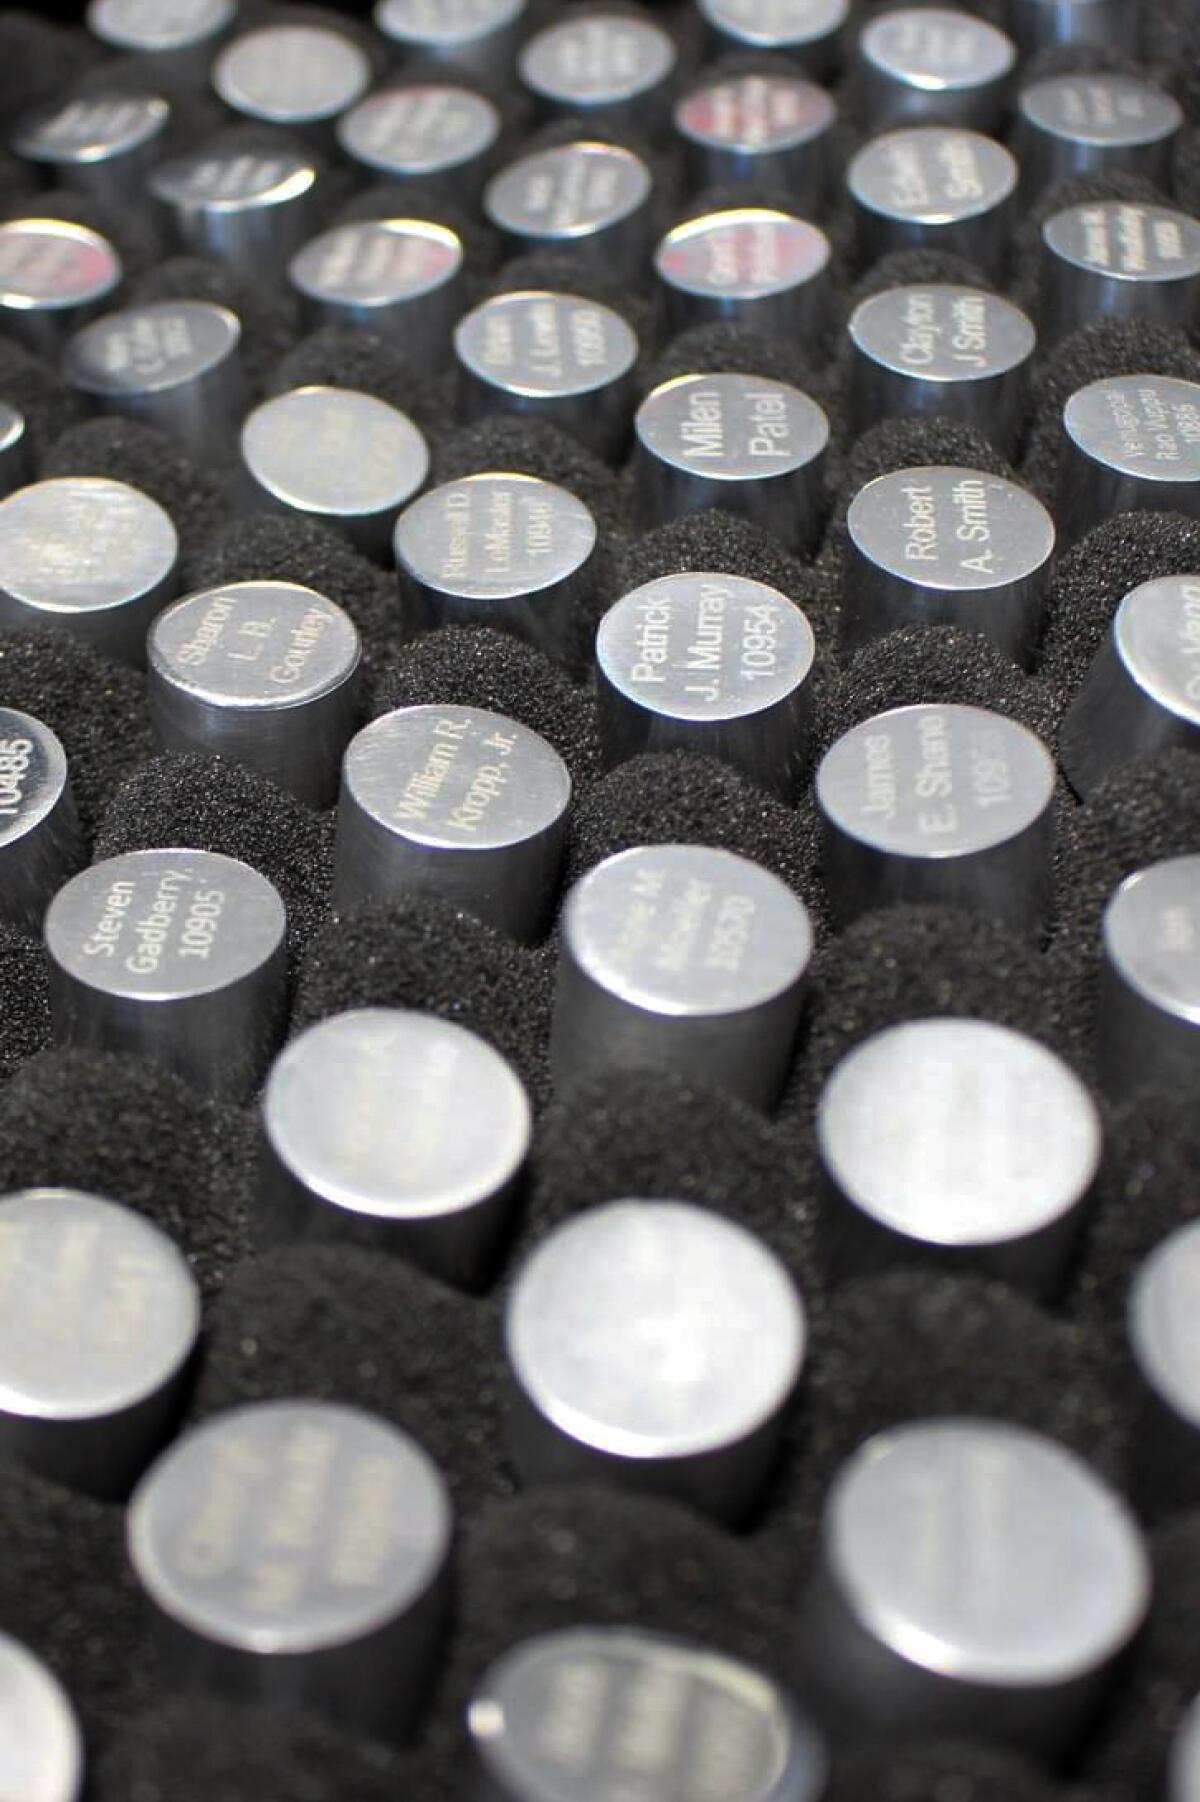 The tops of silver metal capsules arranged in a container.